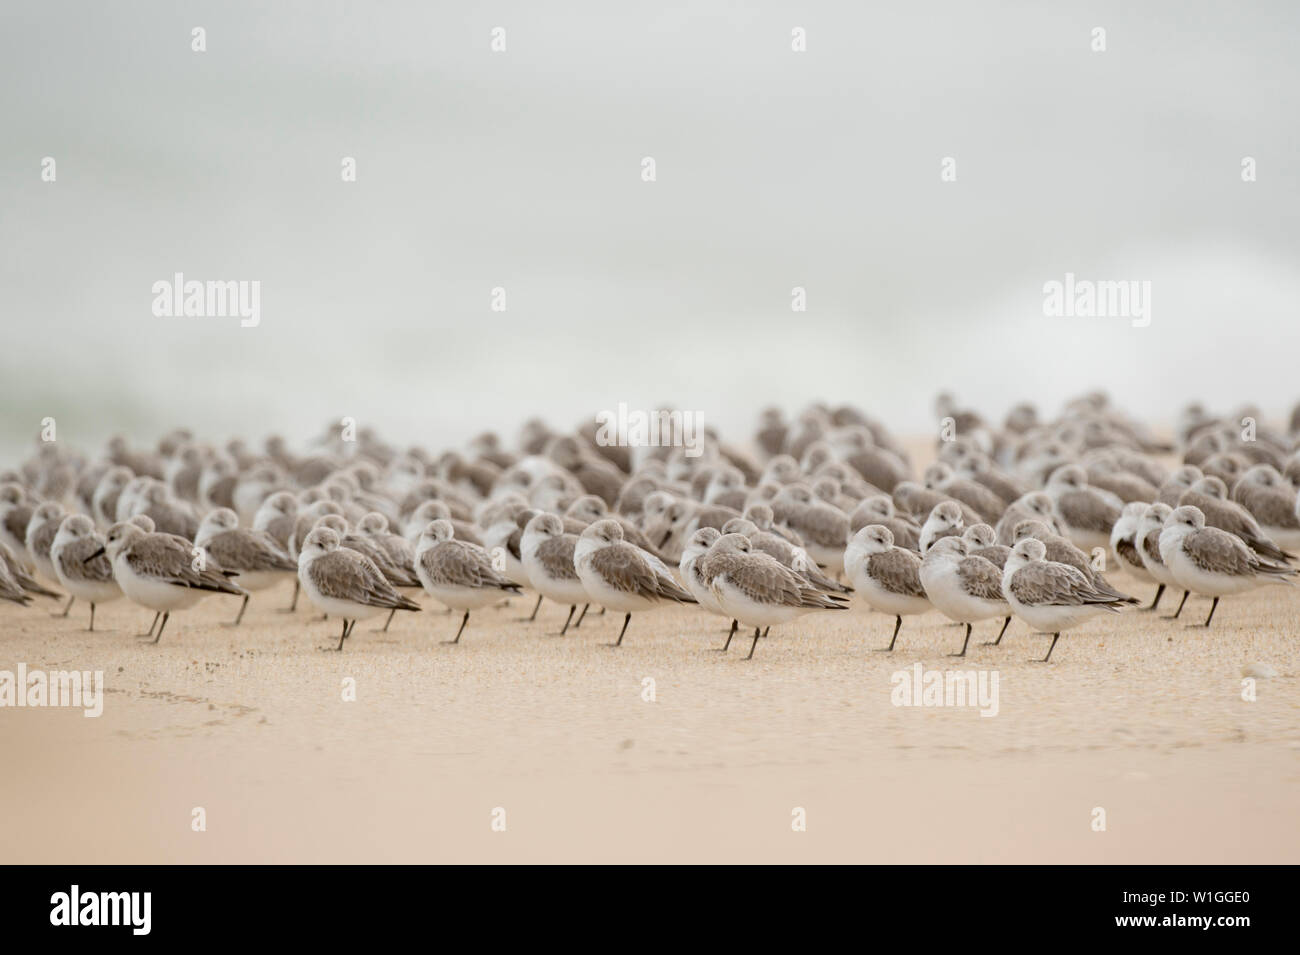 A large flock of Sanderlings stand on a sandy beach resting with their beaks tucked into their feathers. Stock Photo